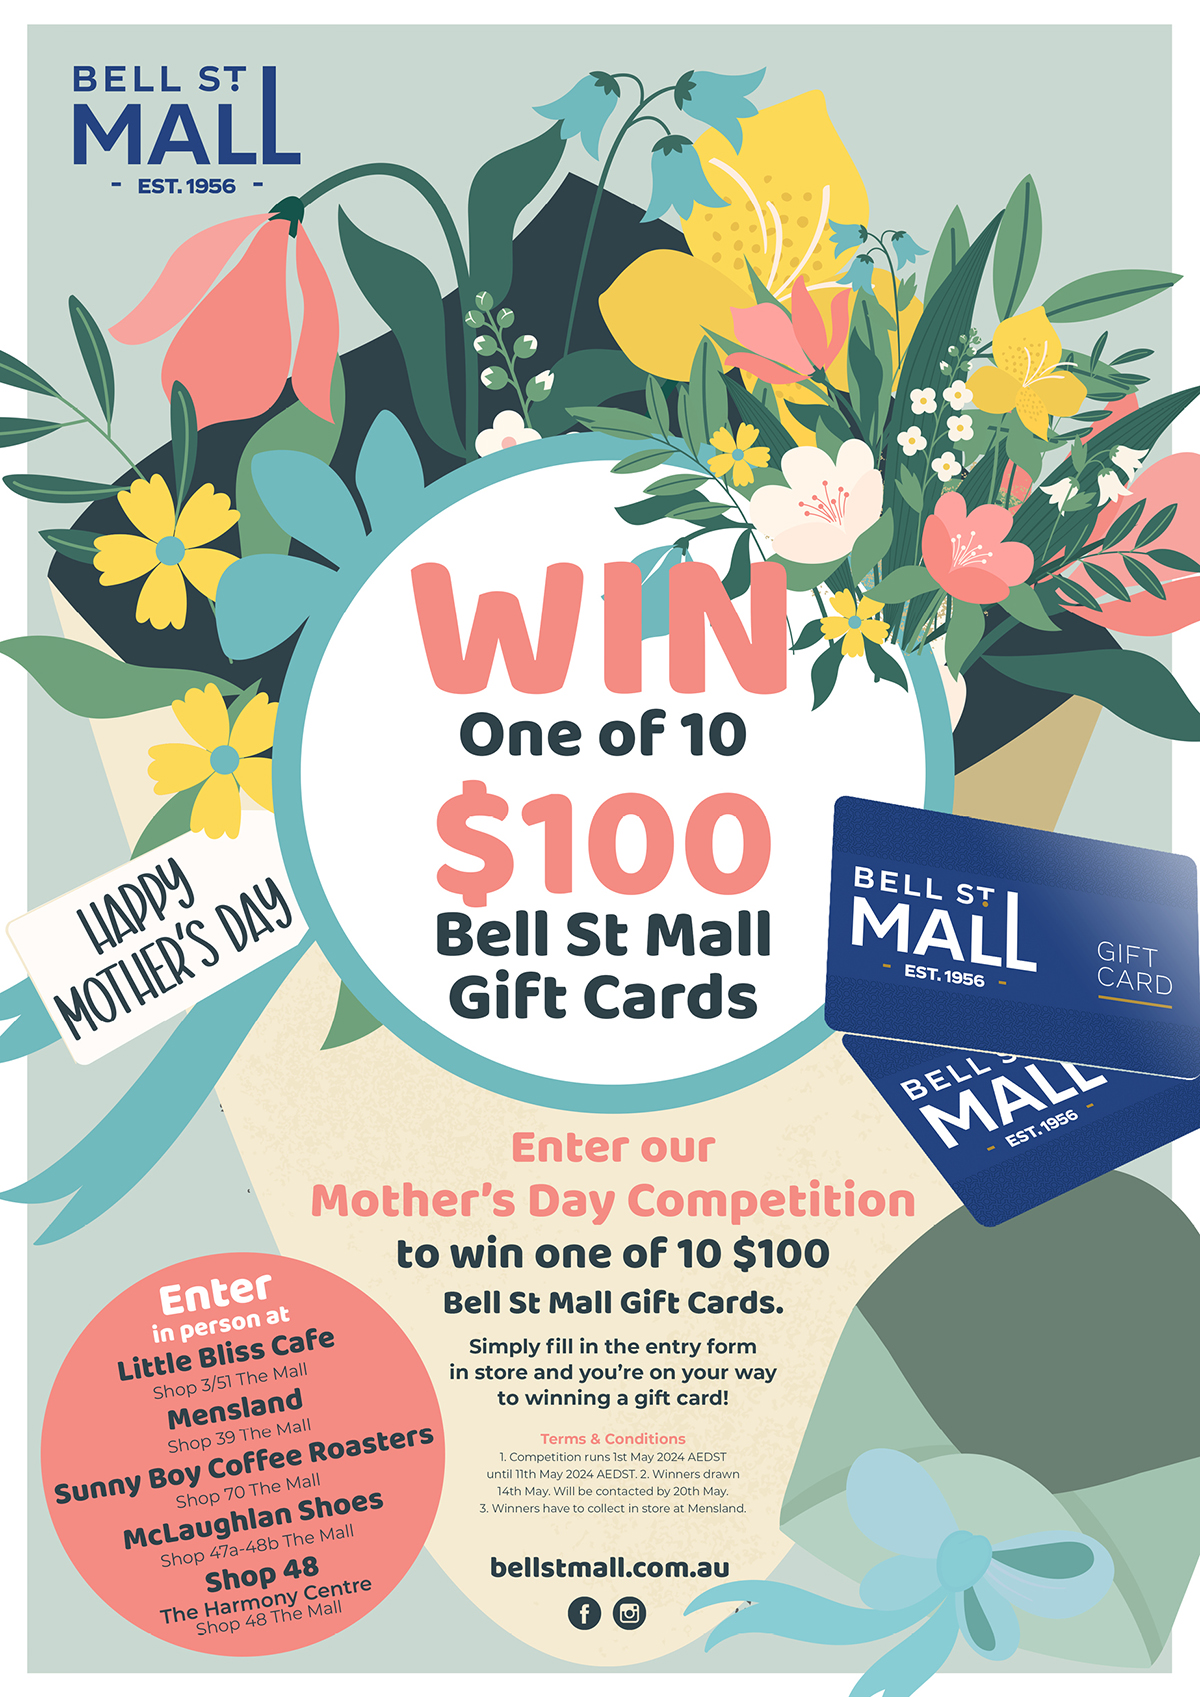 Bell St Mall Mother's Day Gift Card Giveaway